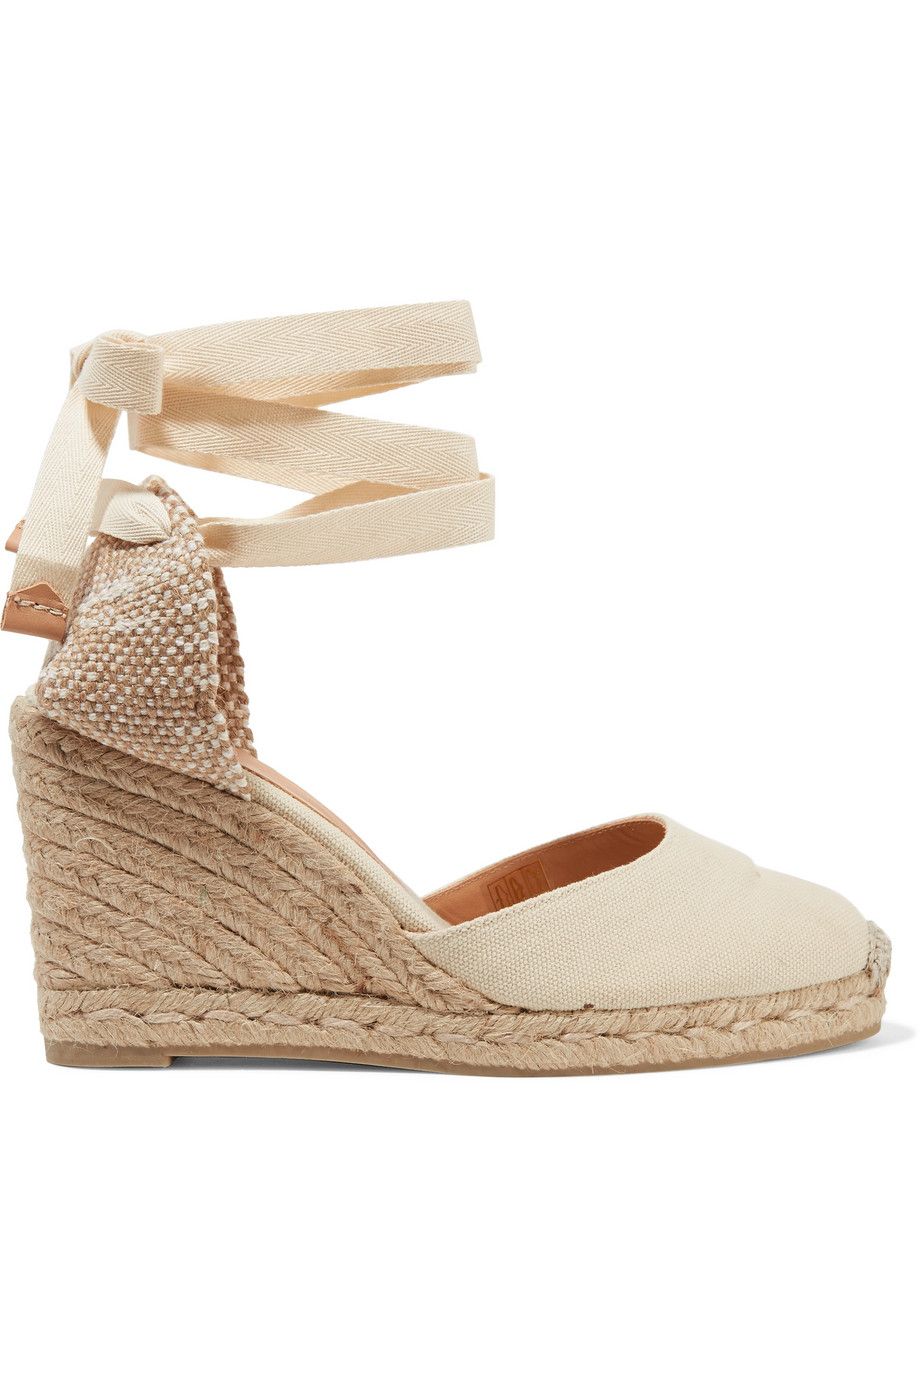 Wedge sandals: 19 best wedges to shop 